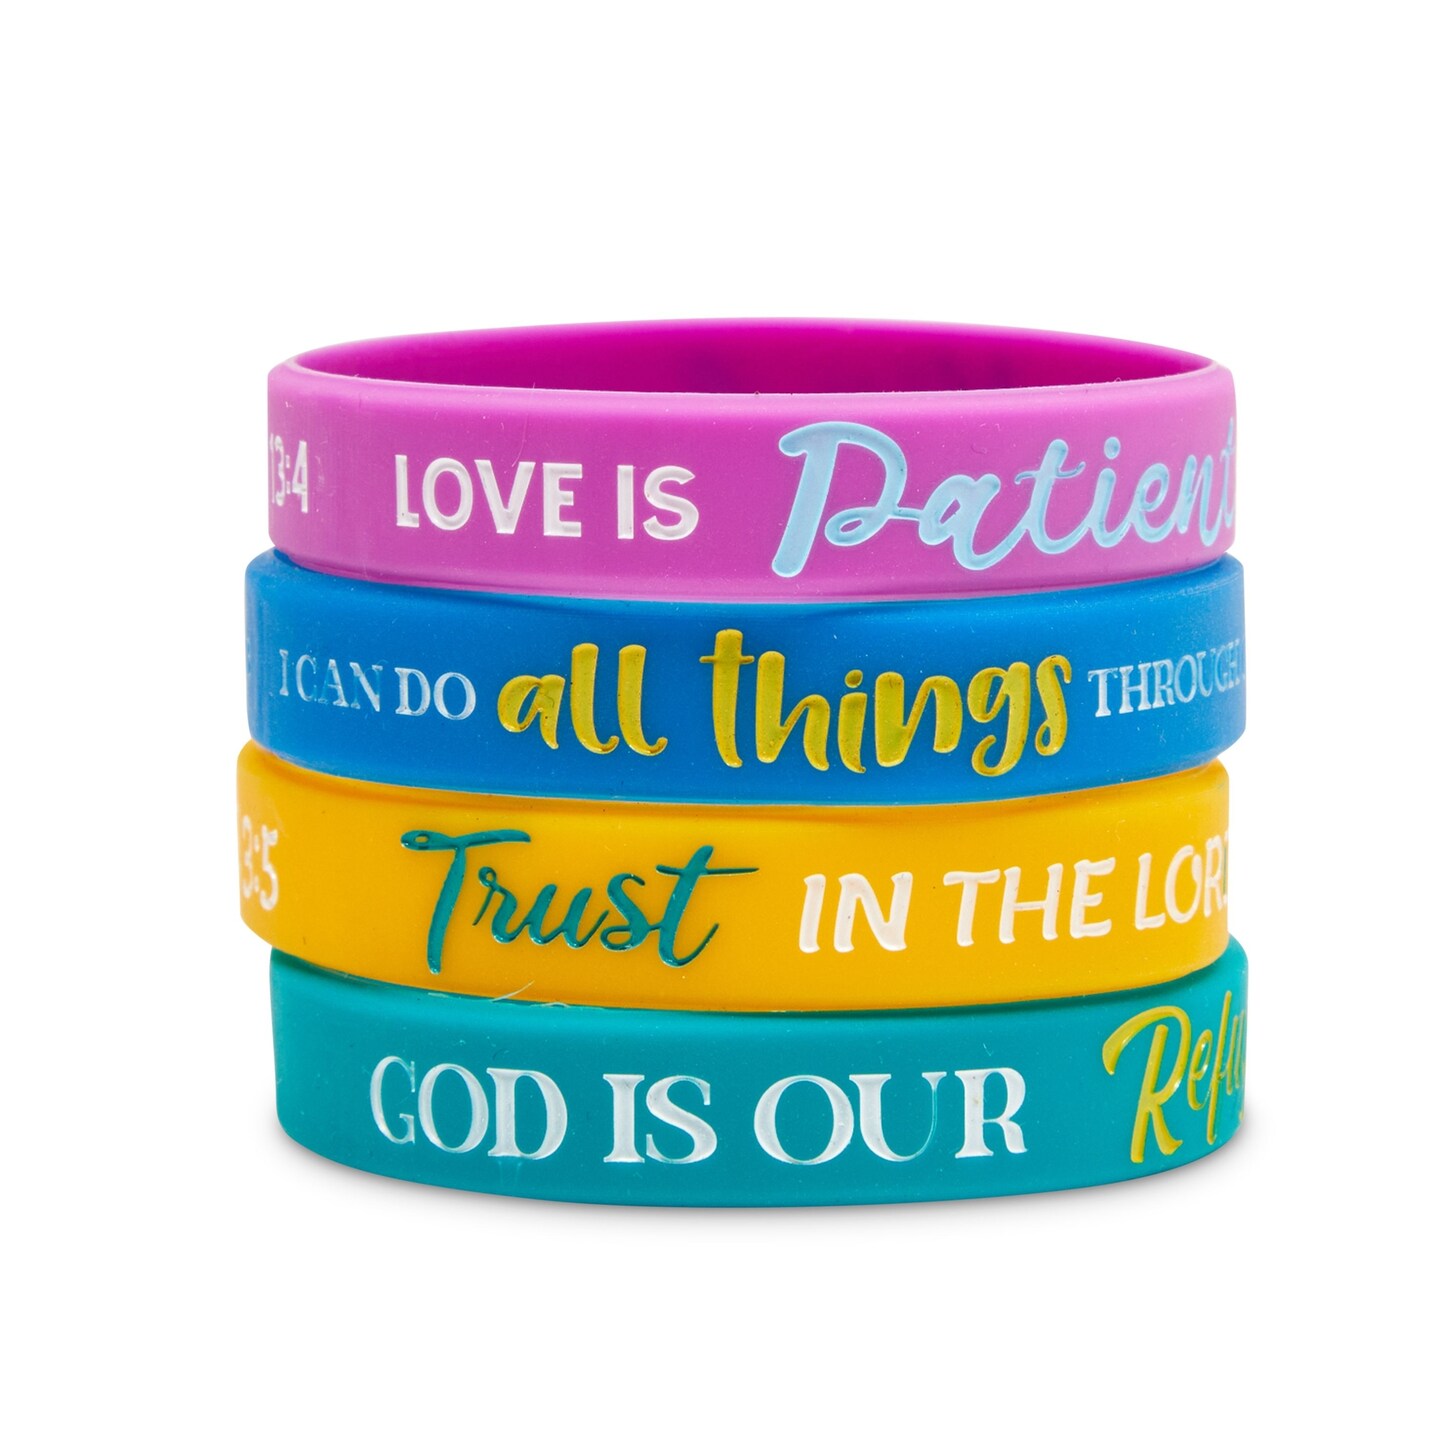 Custom Silicone Wristbands -Personalize Rubber Bracelets Events Gifts  Motivation | eBay